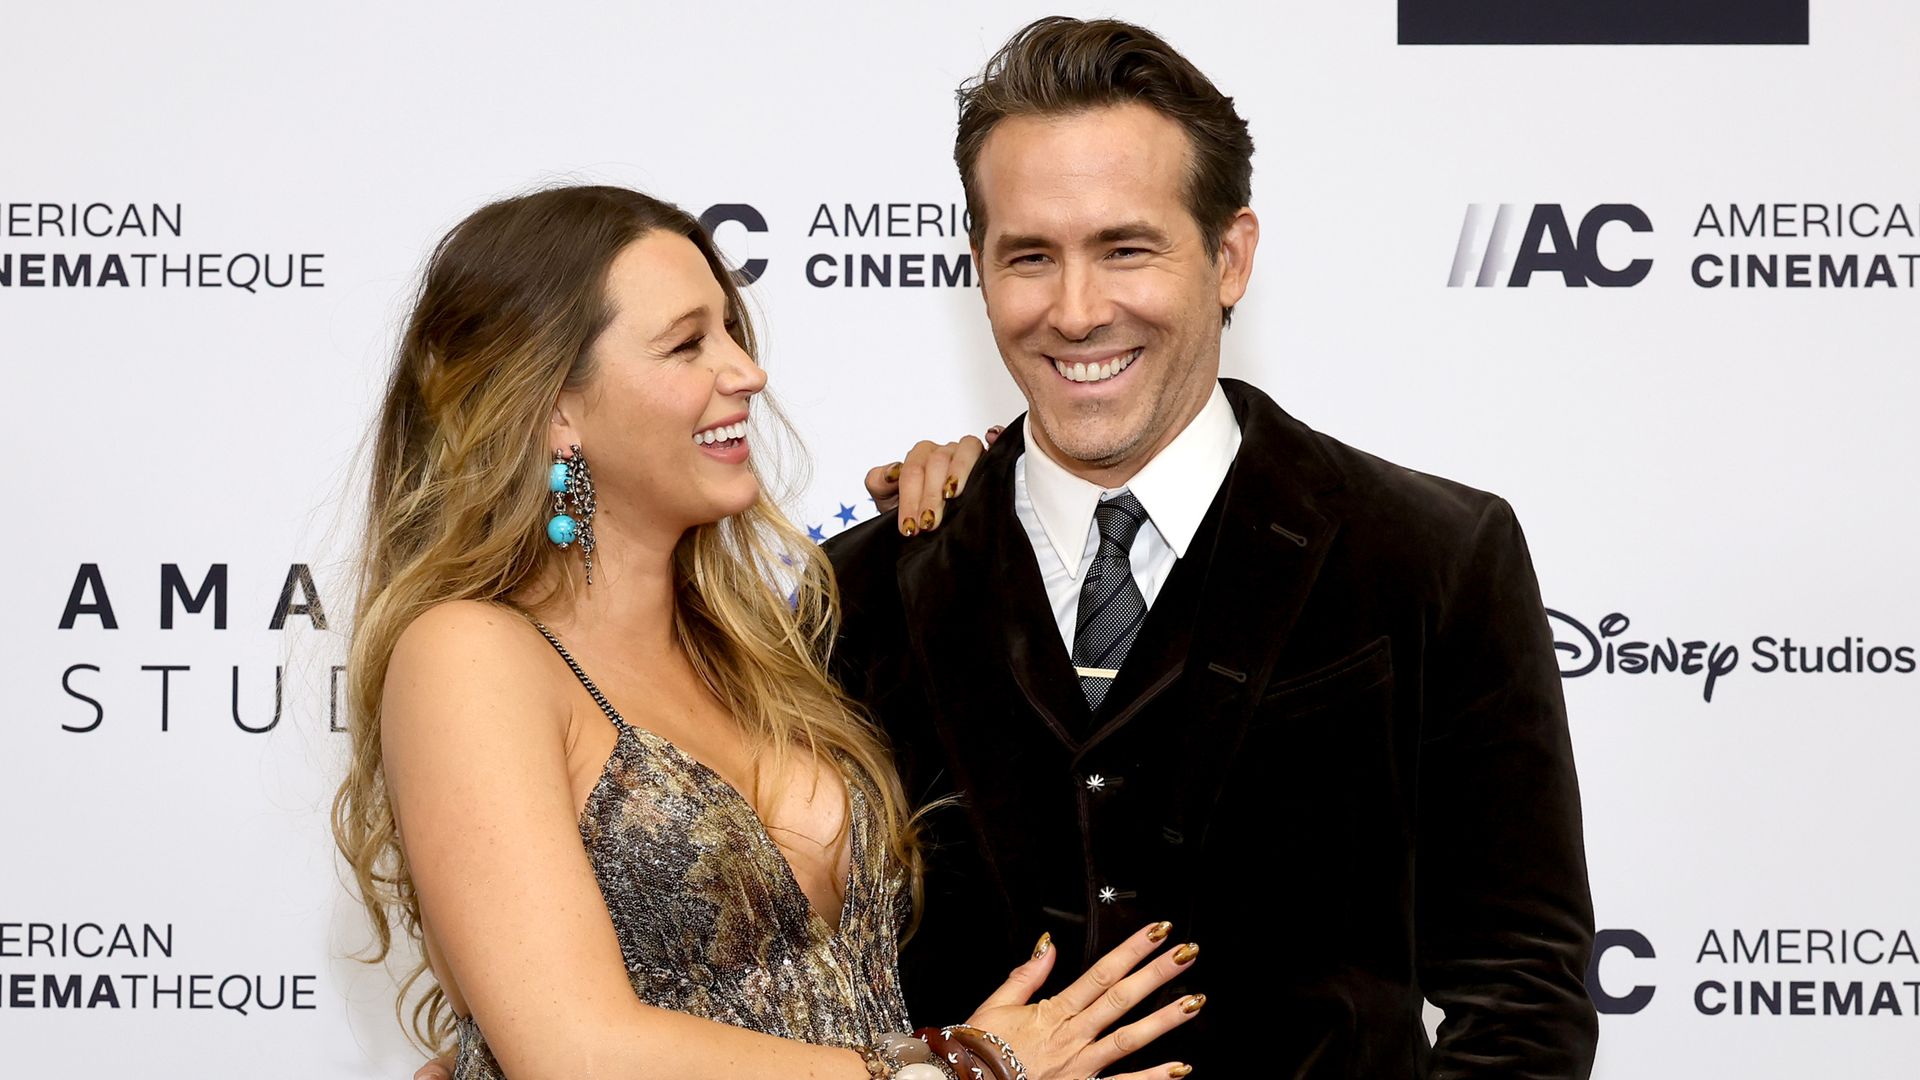 Ryan Reynolds and a pregnant Blake Lively smiling at each other